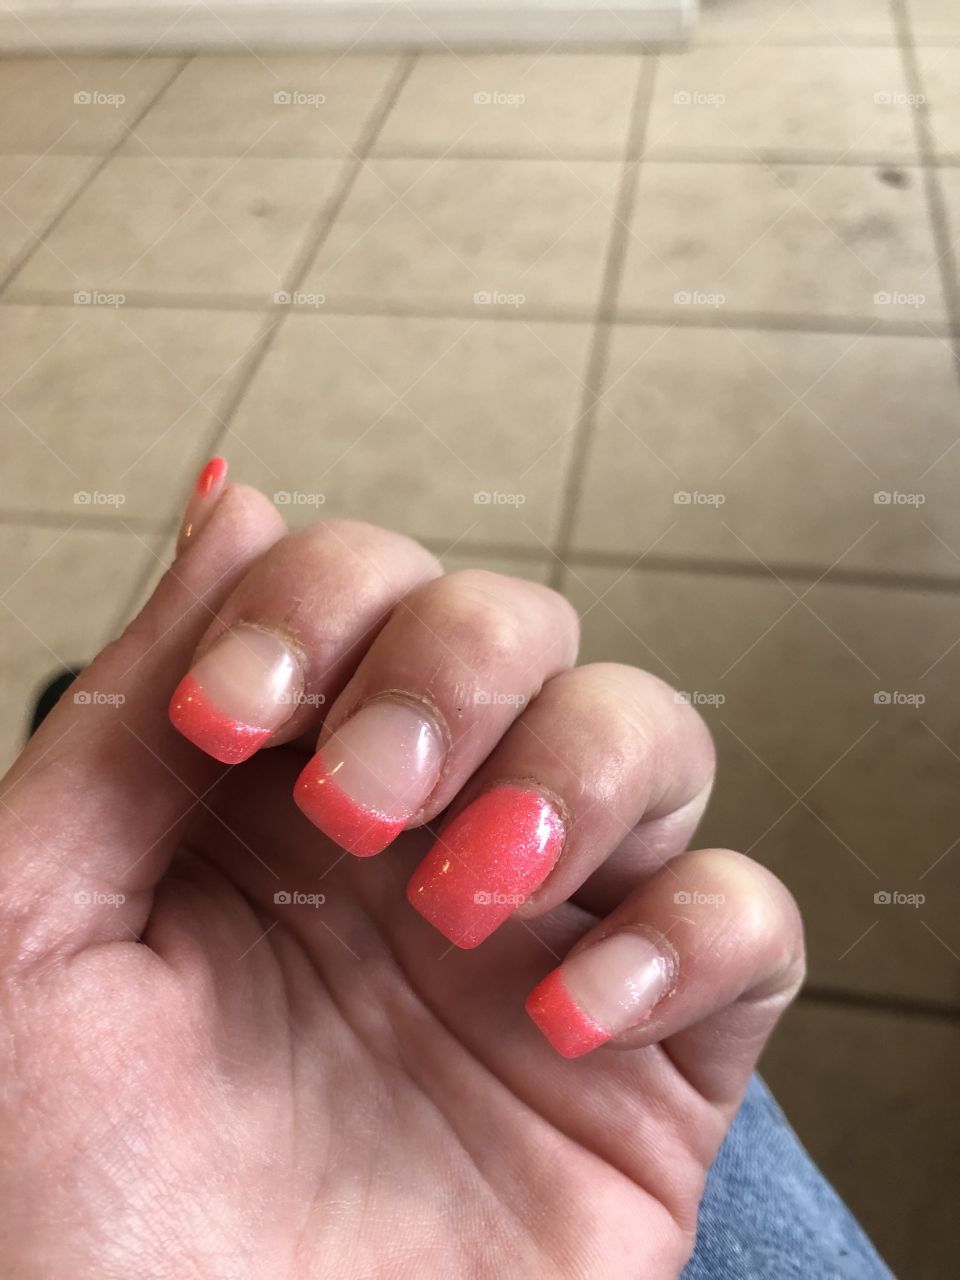 Got my nails done